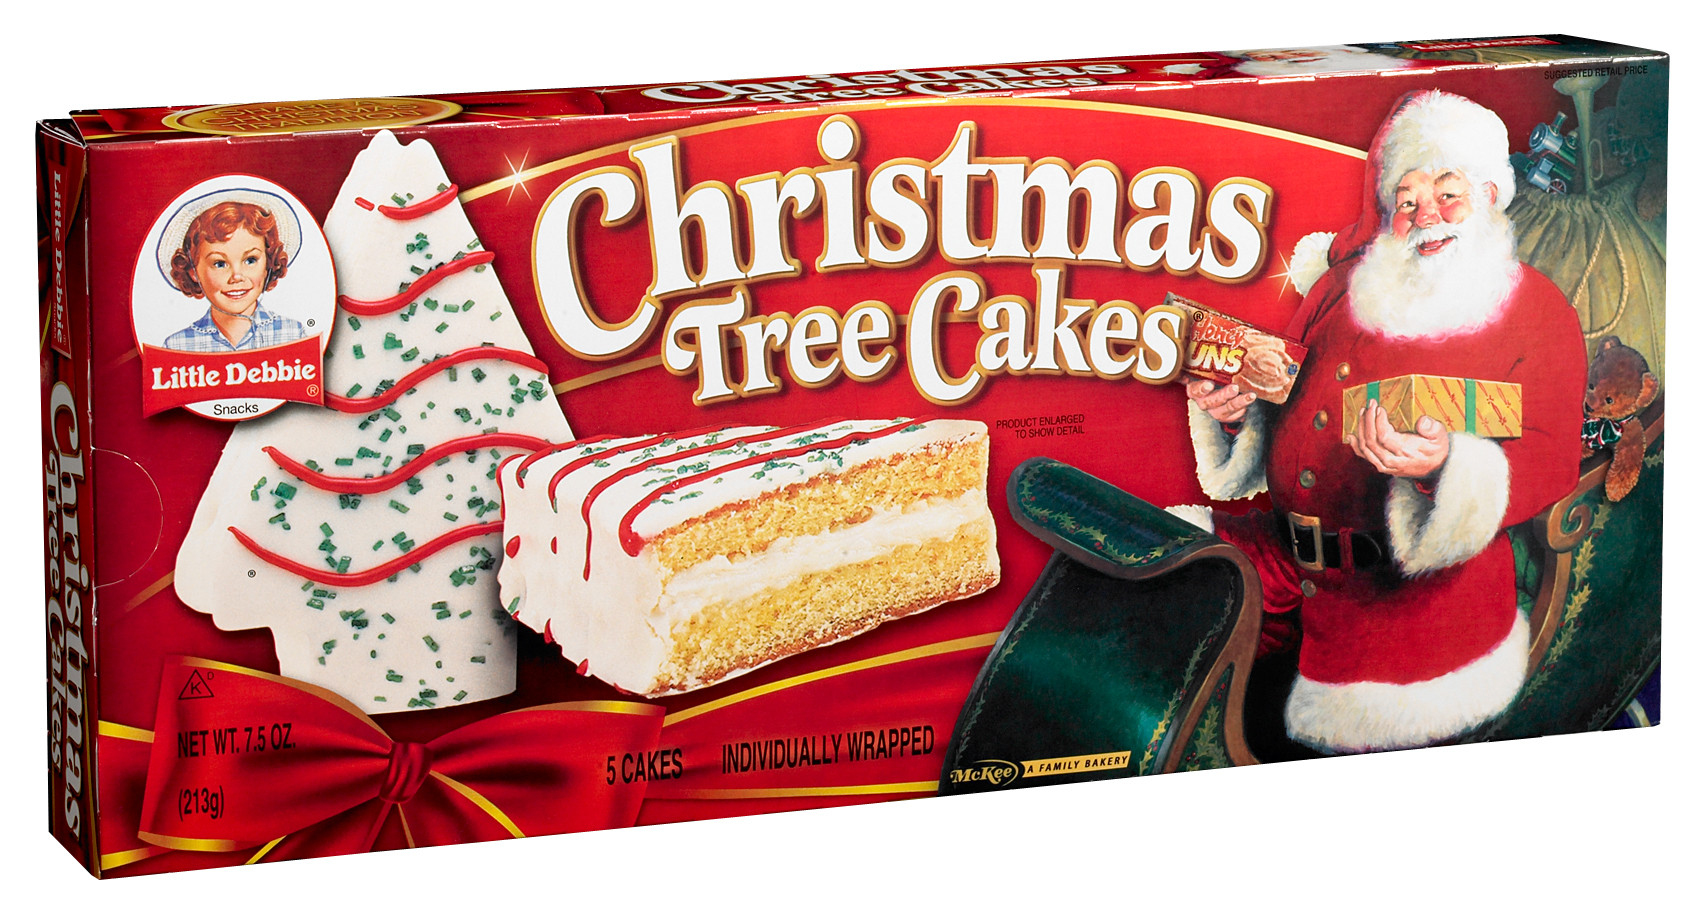 Little Debbie Christmas Tree Cakes
 Little Debbie Copycat Recipes To Make At Home